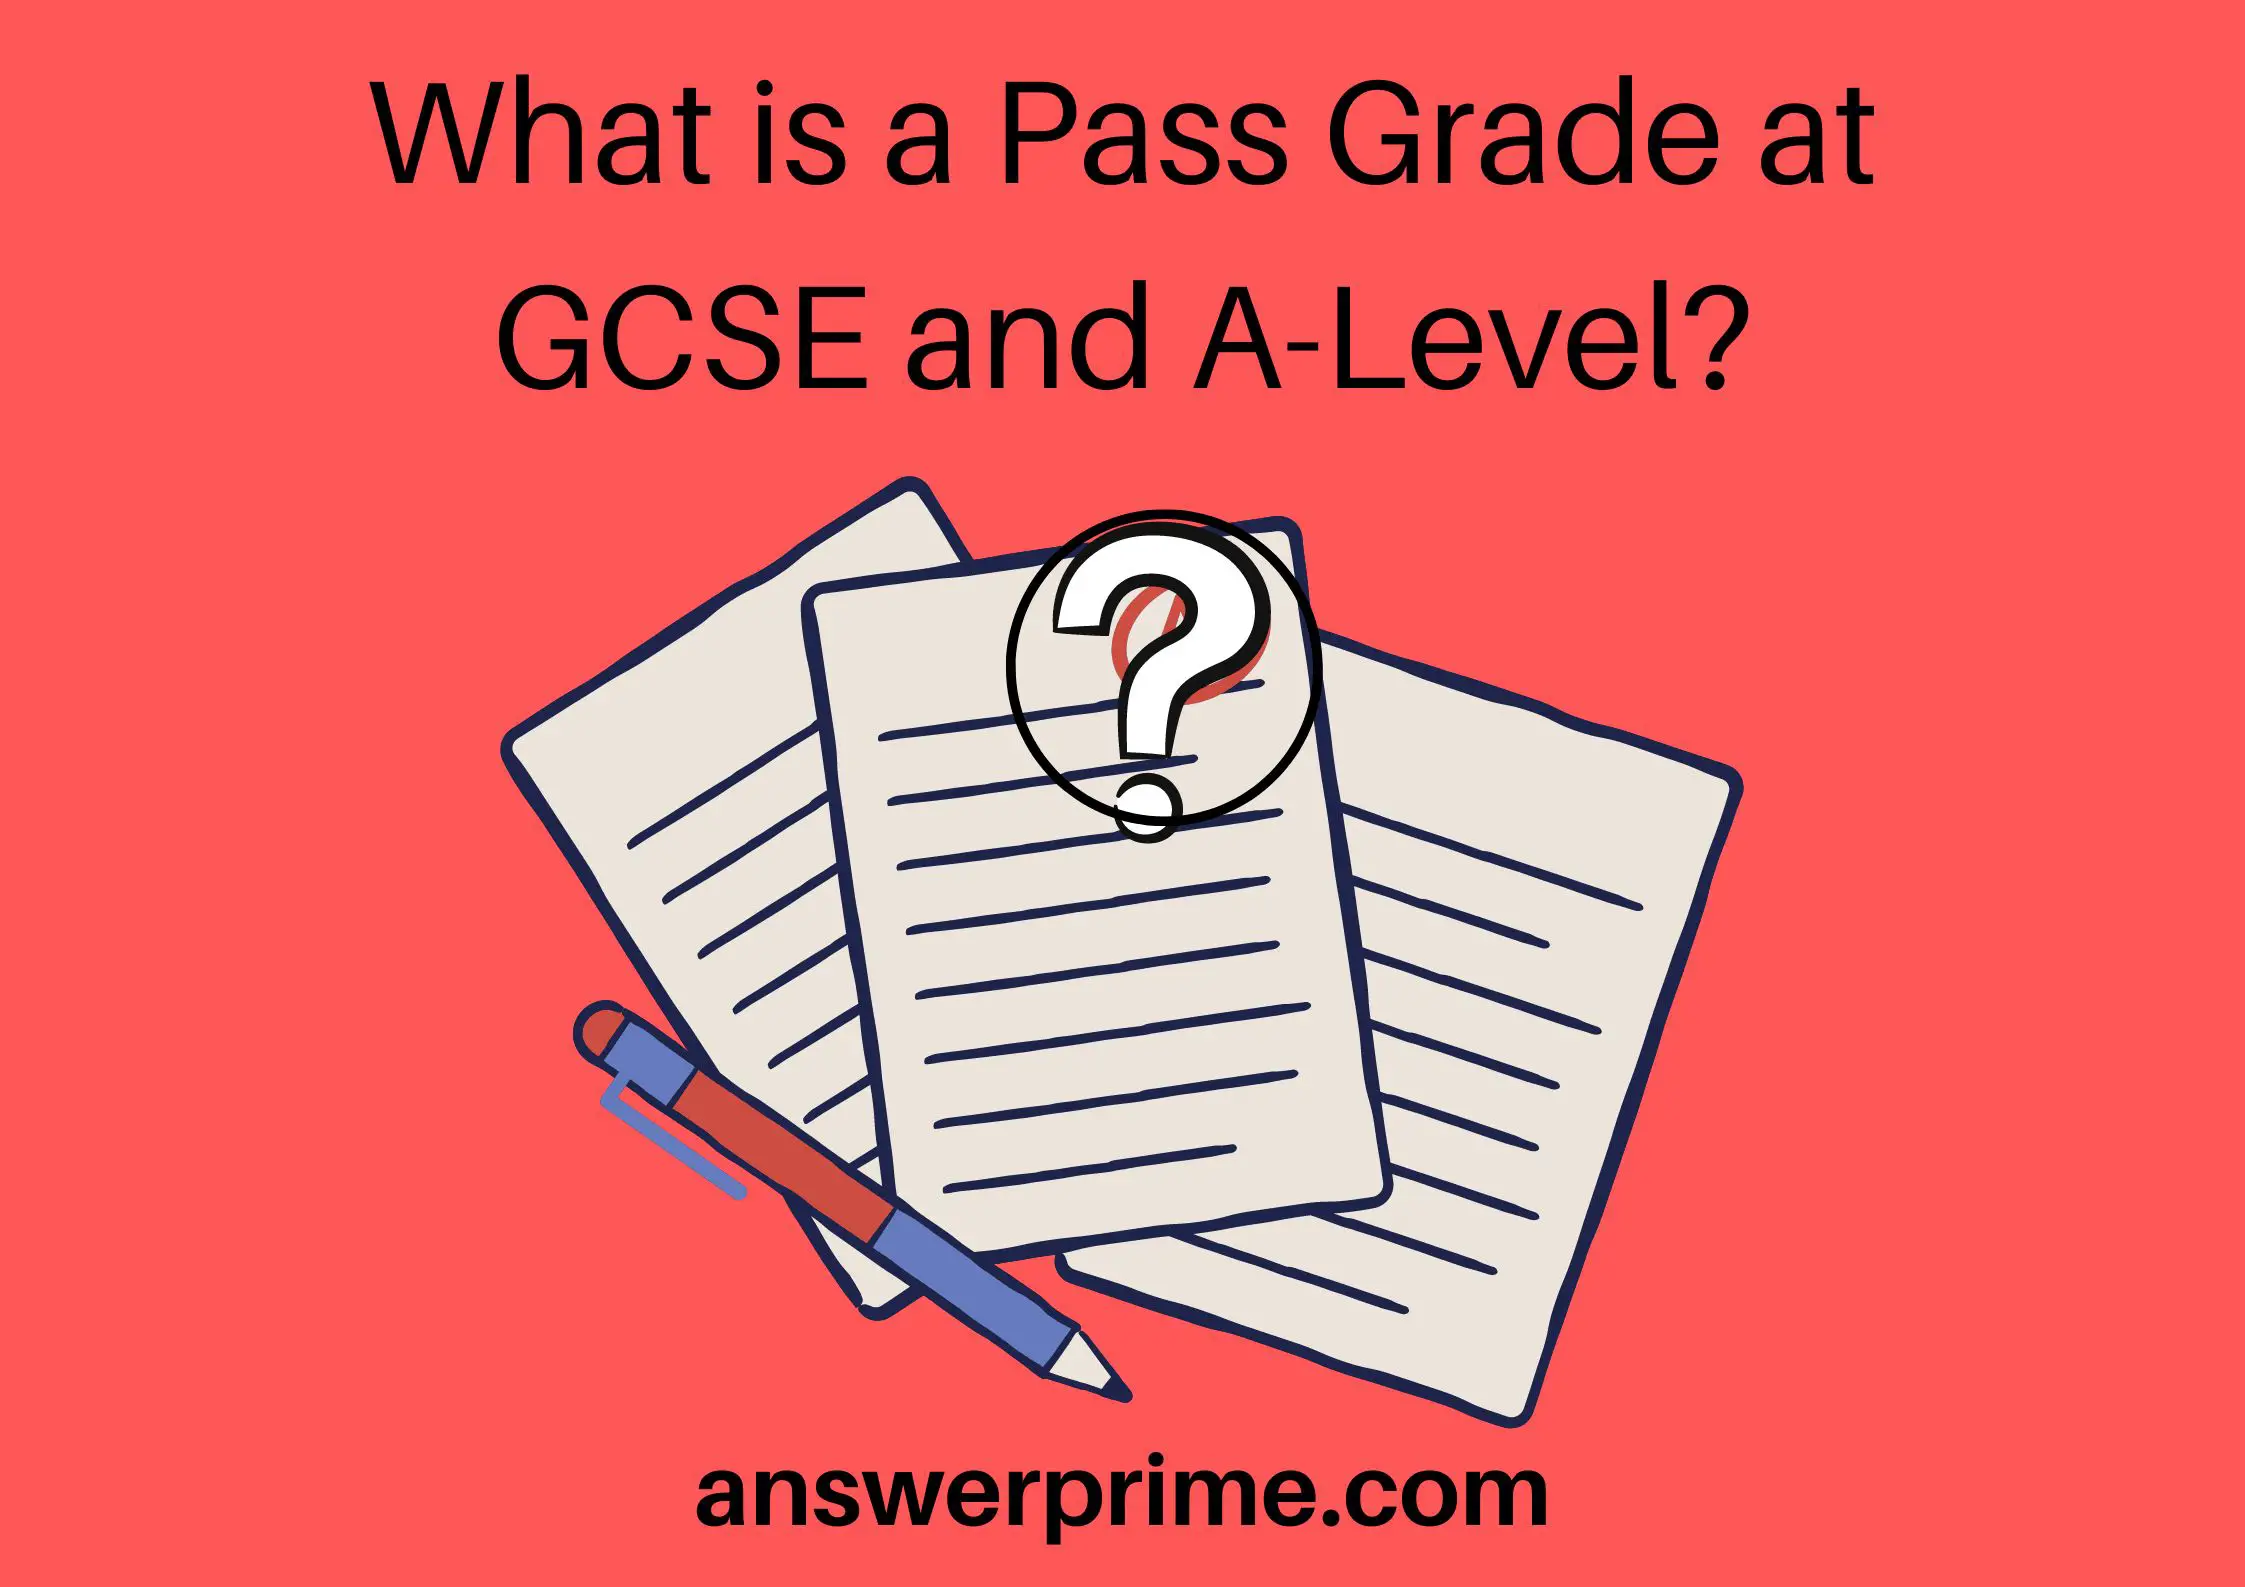 What is a Pass Grade at GCSE and A-Level?